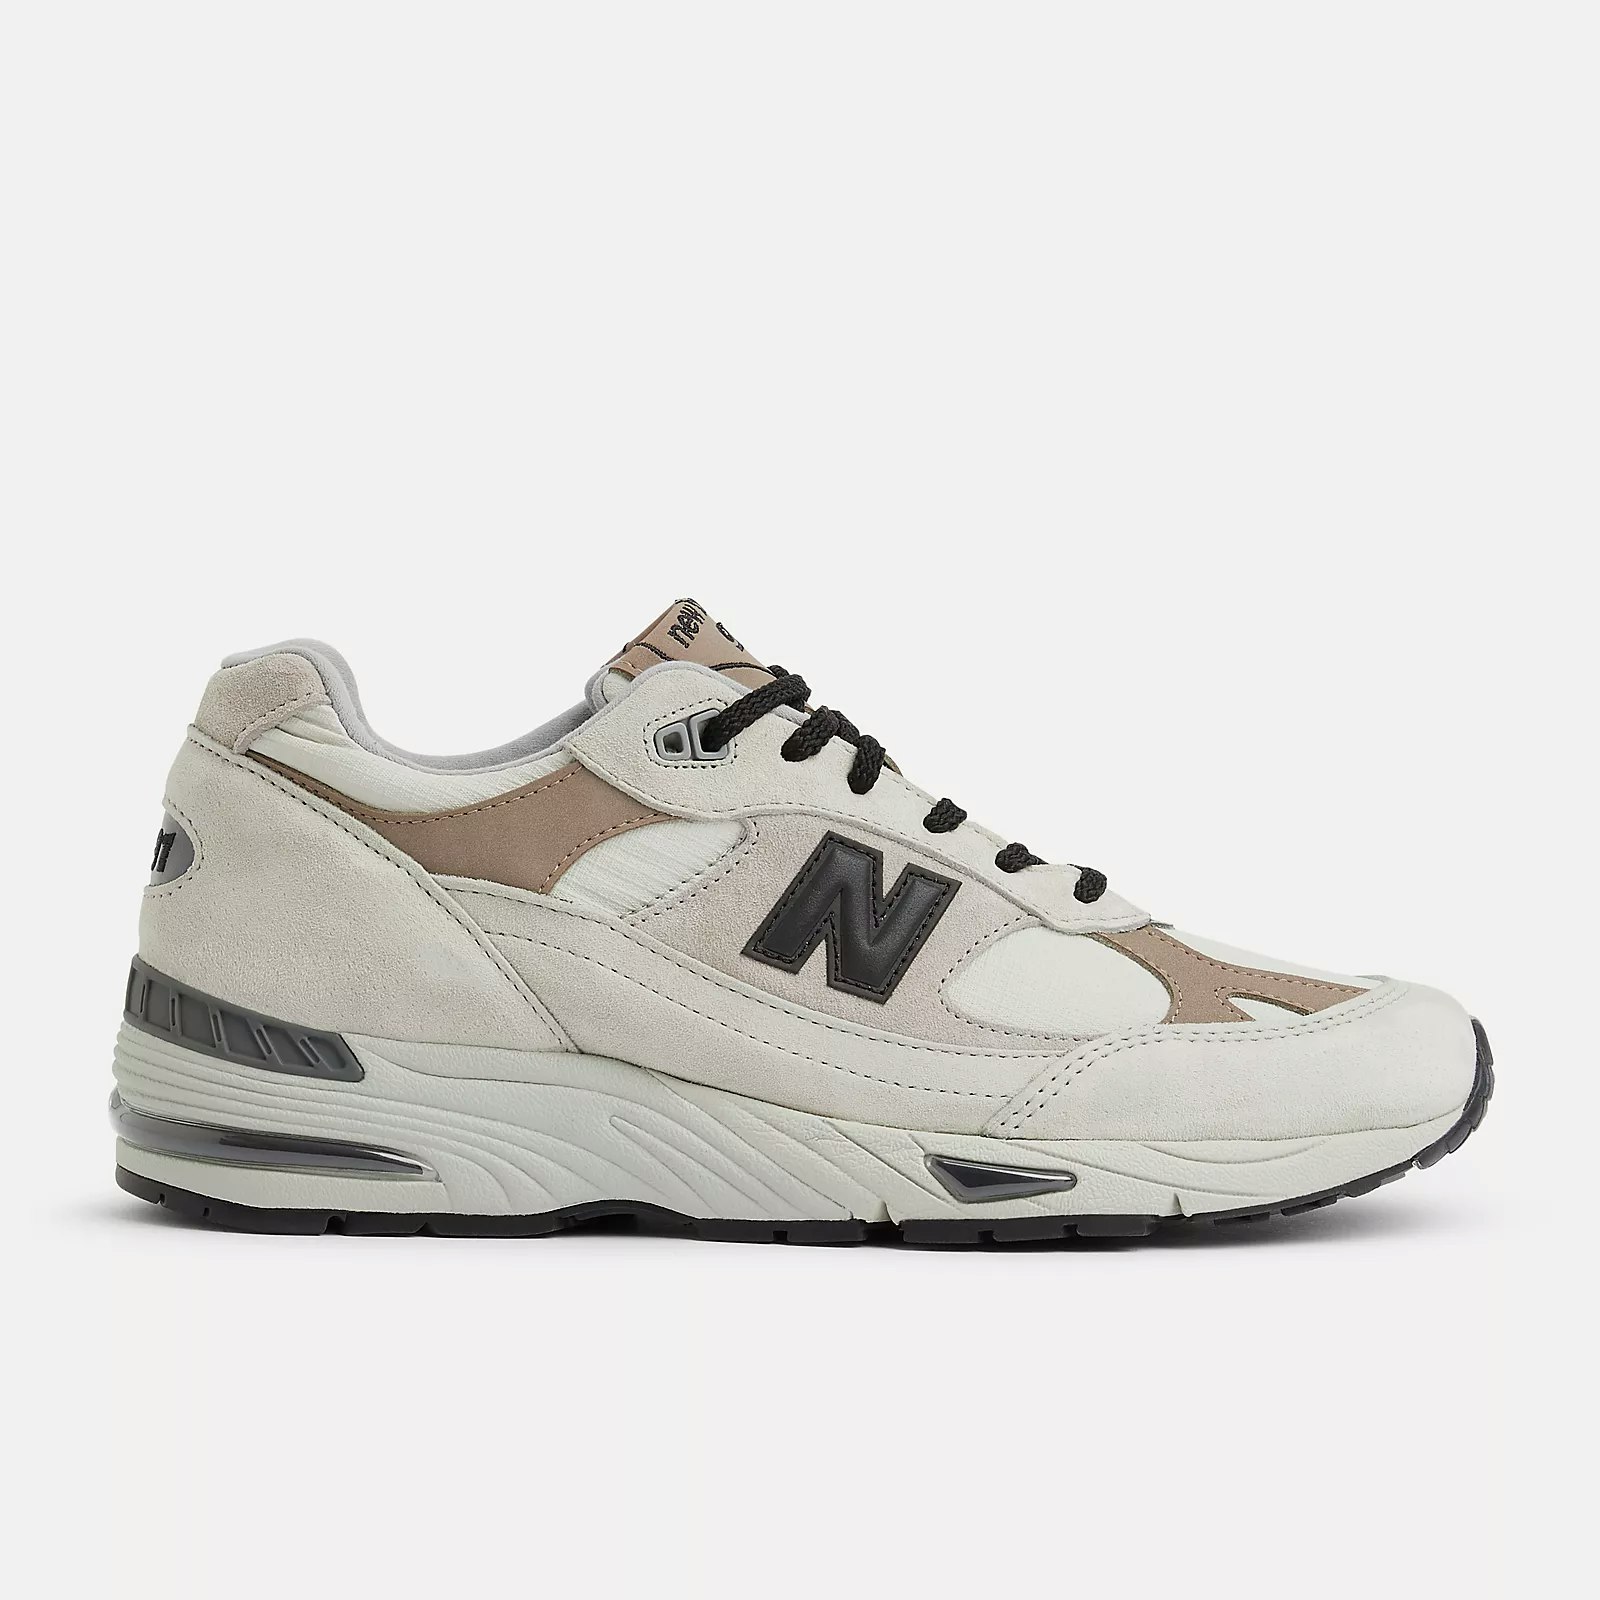 New Balance 991 "Made in UK" (Island Fossil)